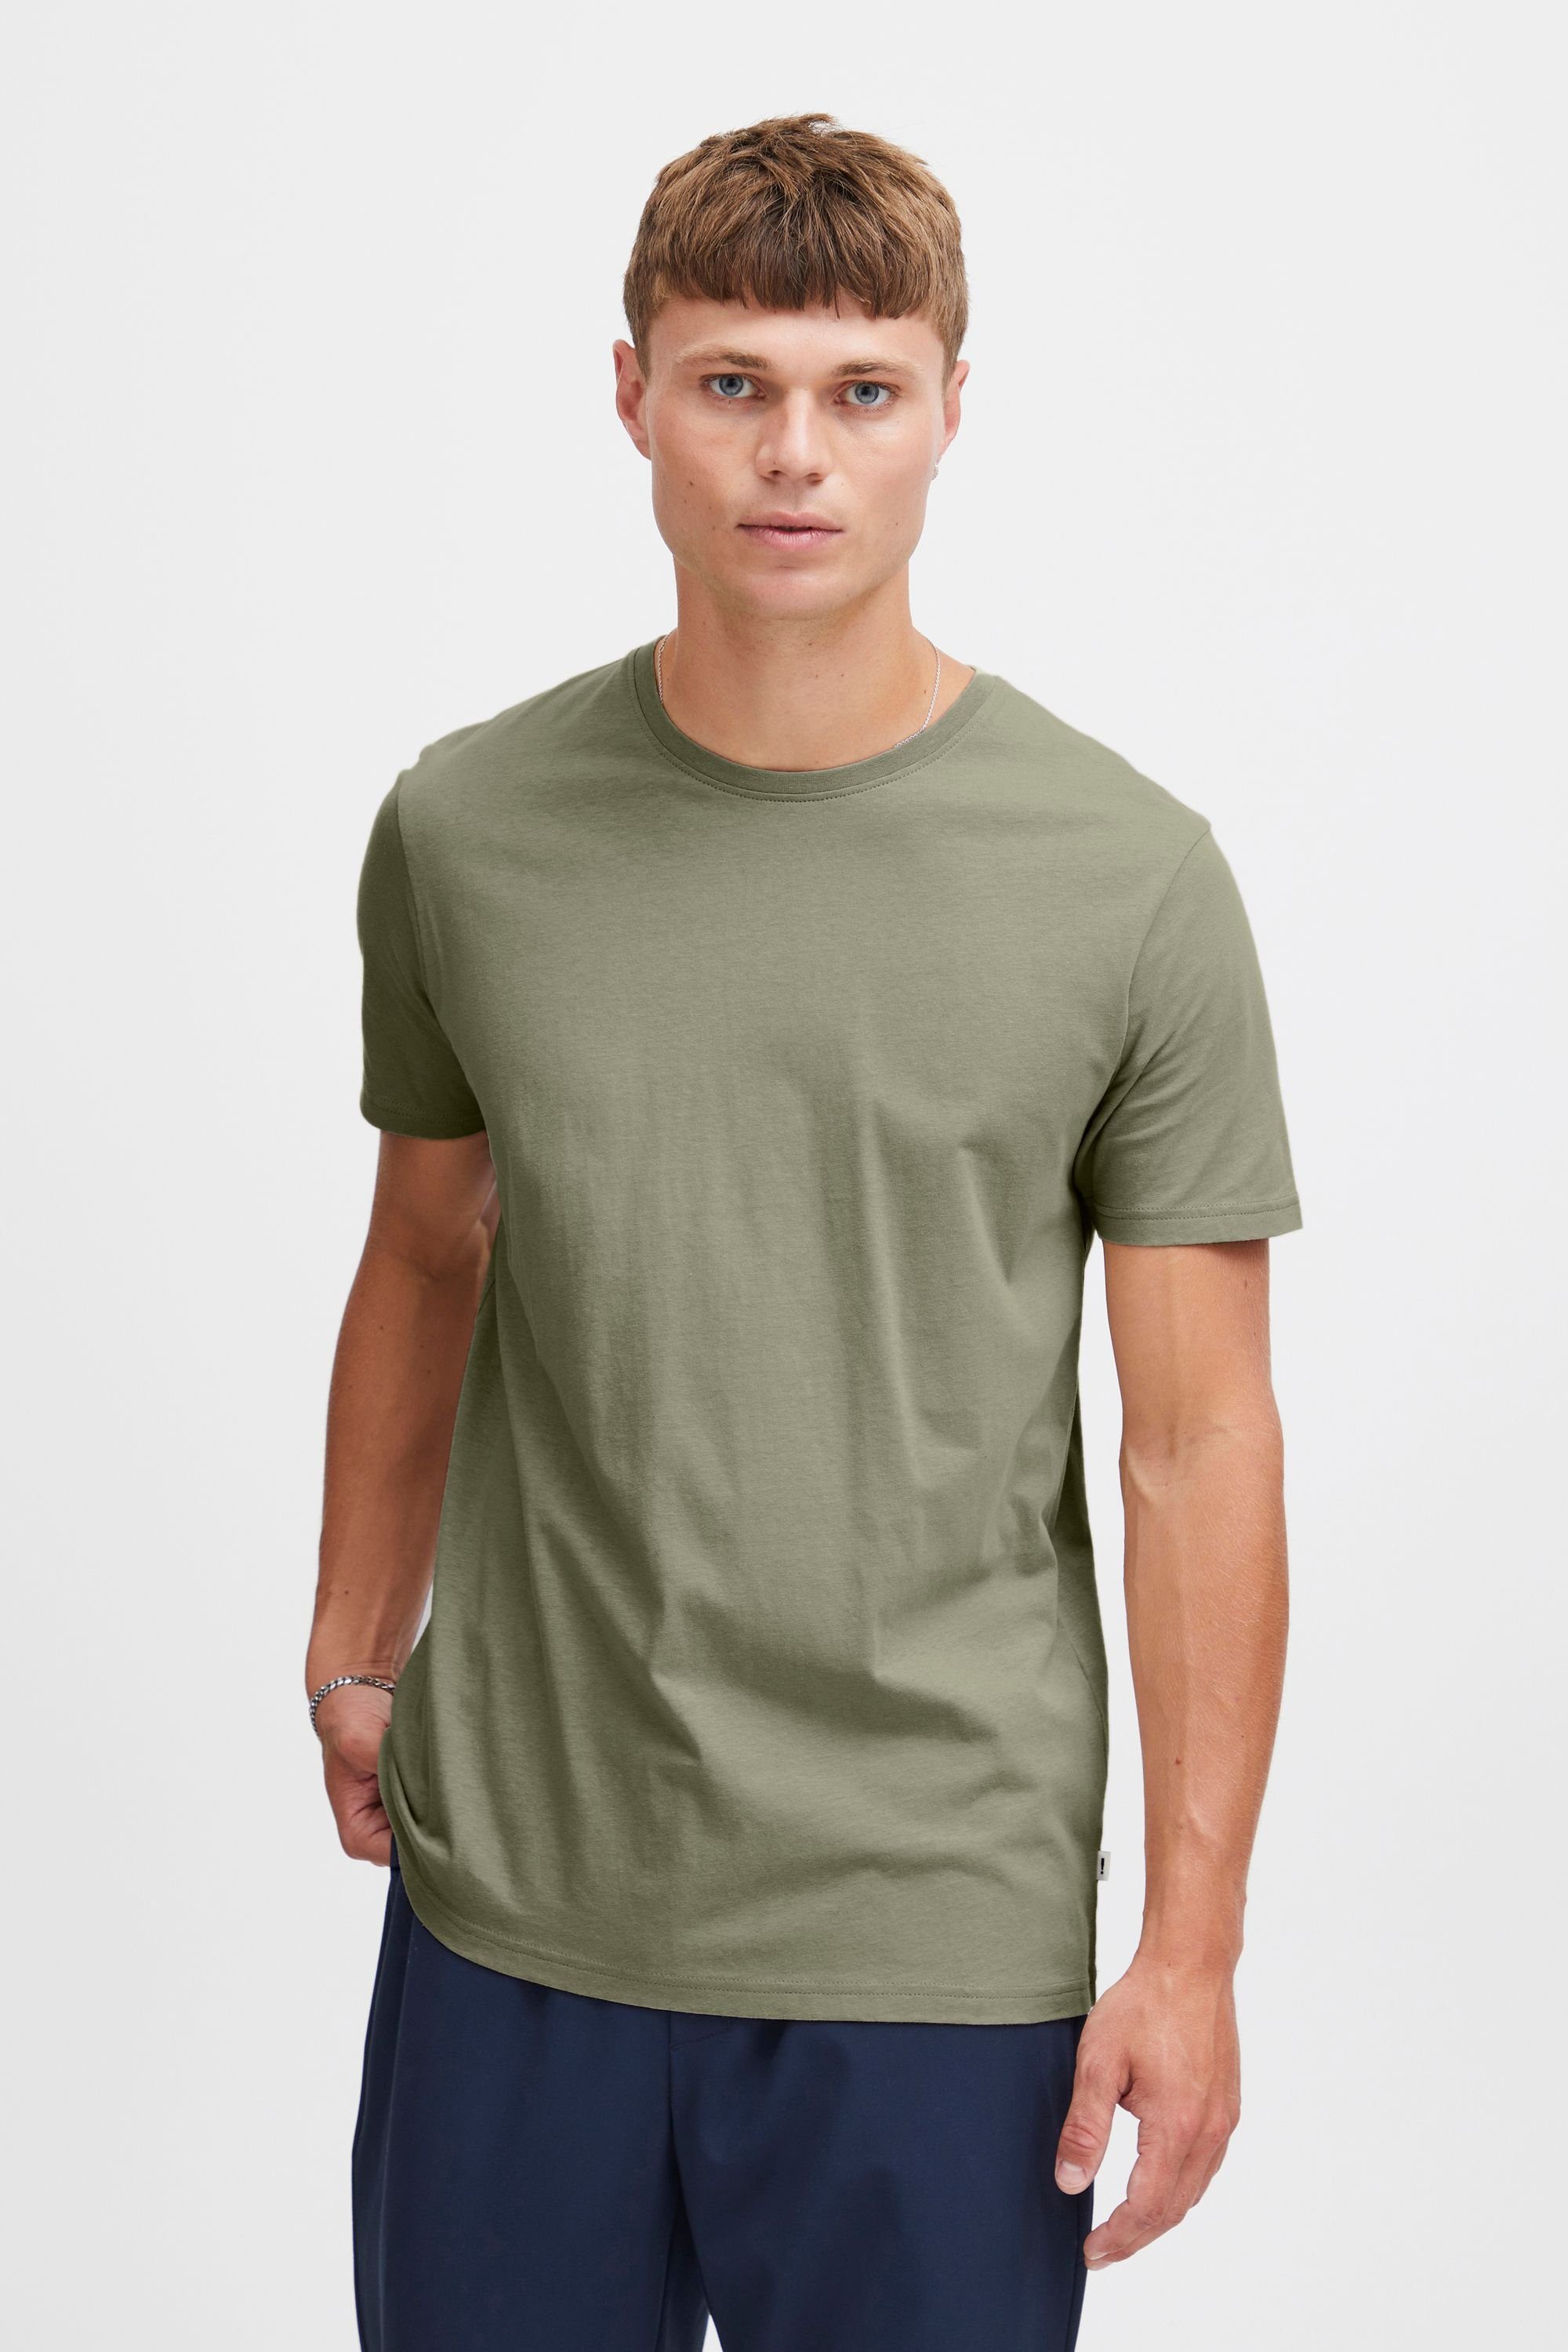 Solid T-Shirt 6194761, Tee - SS - Rock (170613) Vetiver 21103651